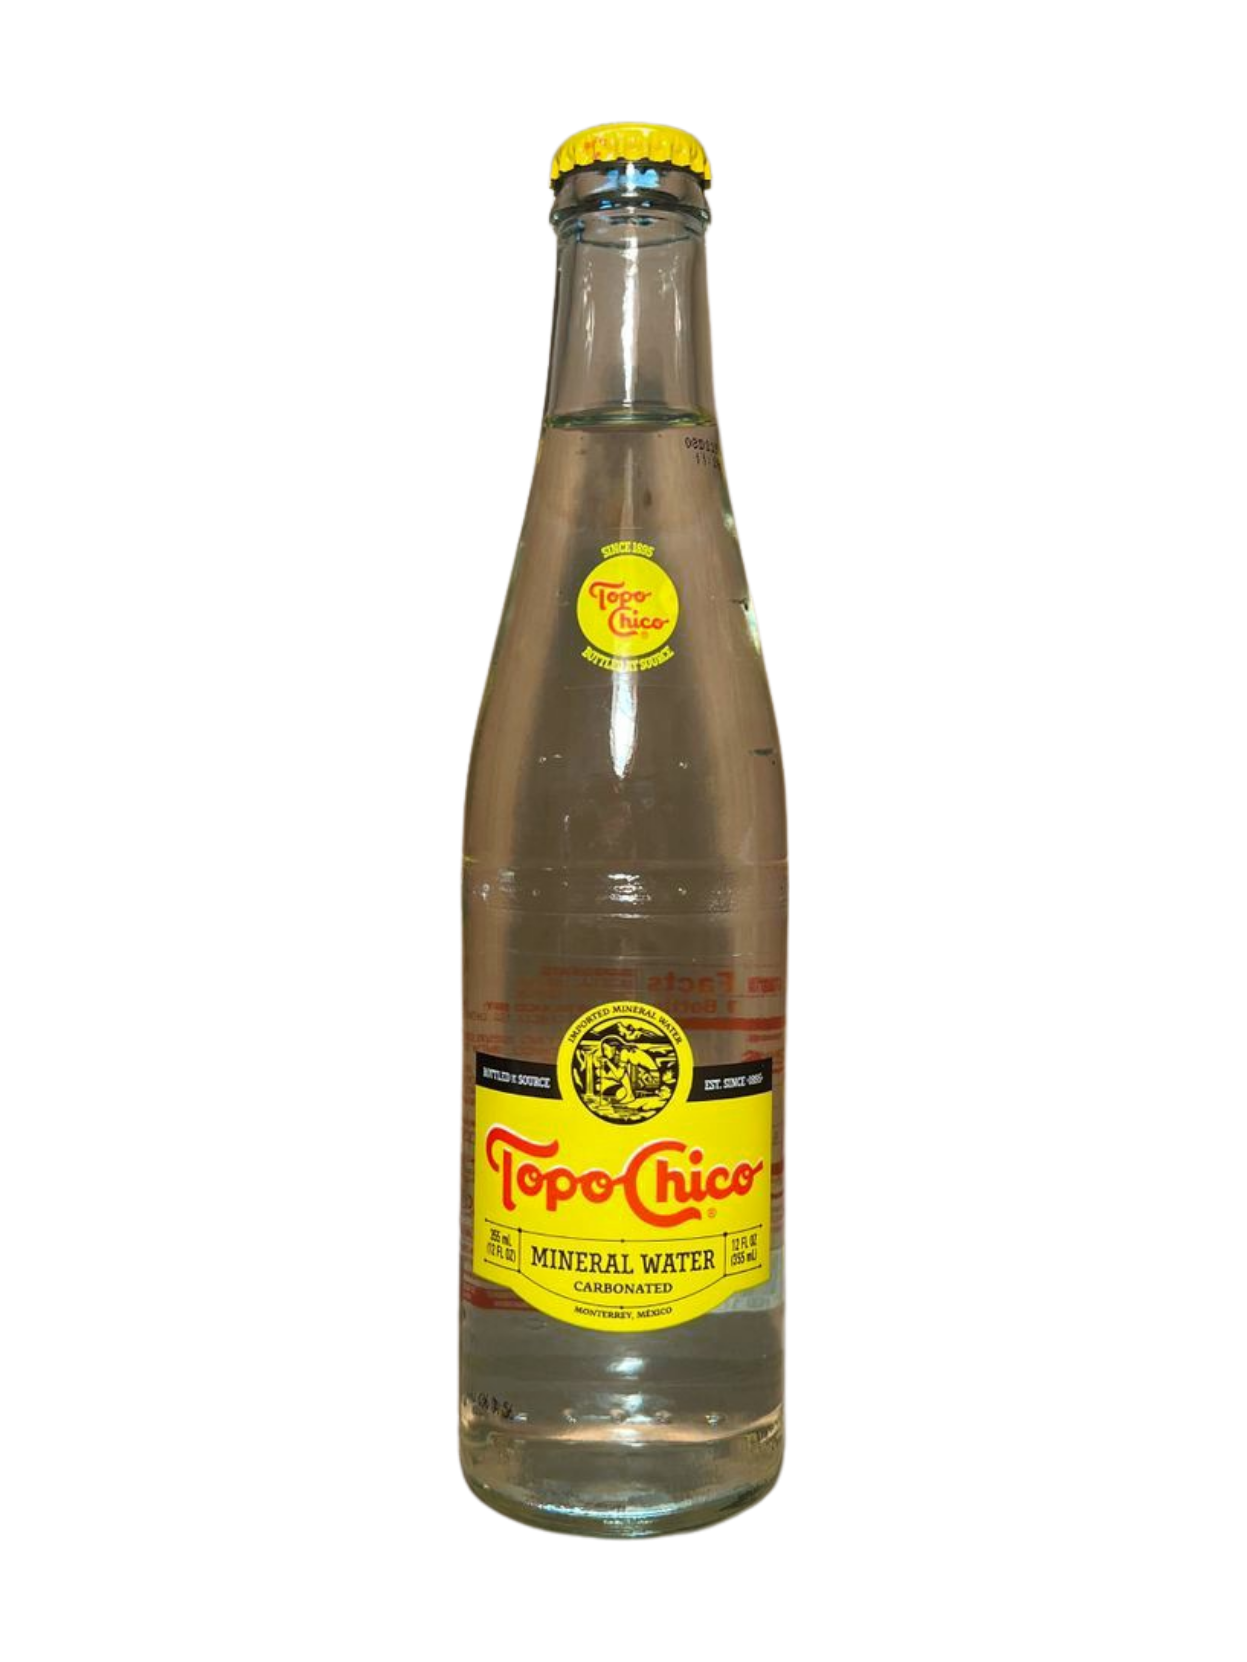 Topo Chico Sparkling Mineral Water Glass Bottles, 12 fl oz, 12 Pack